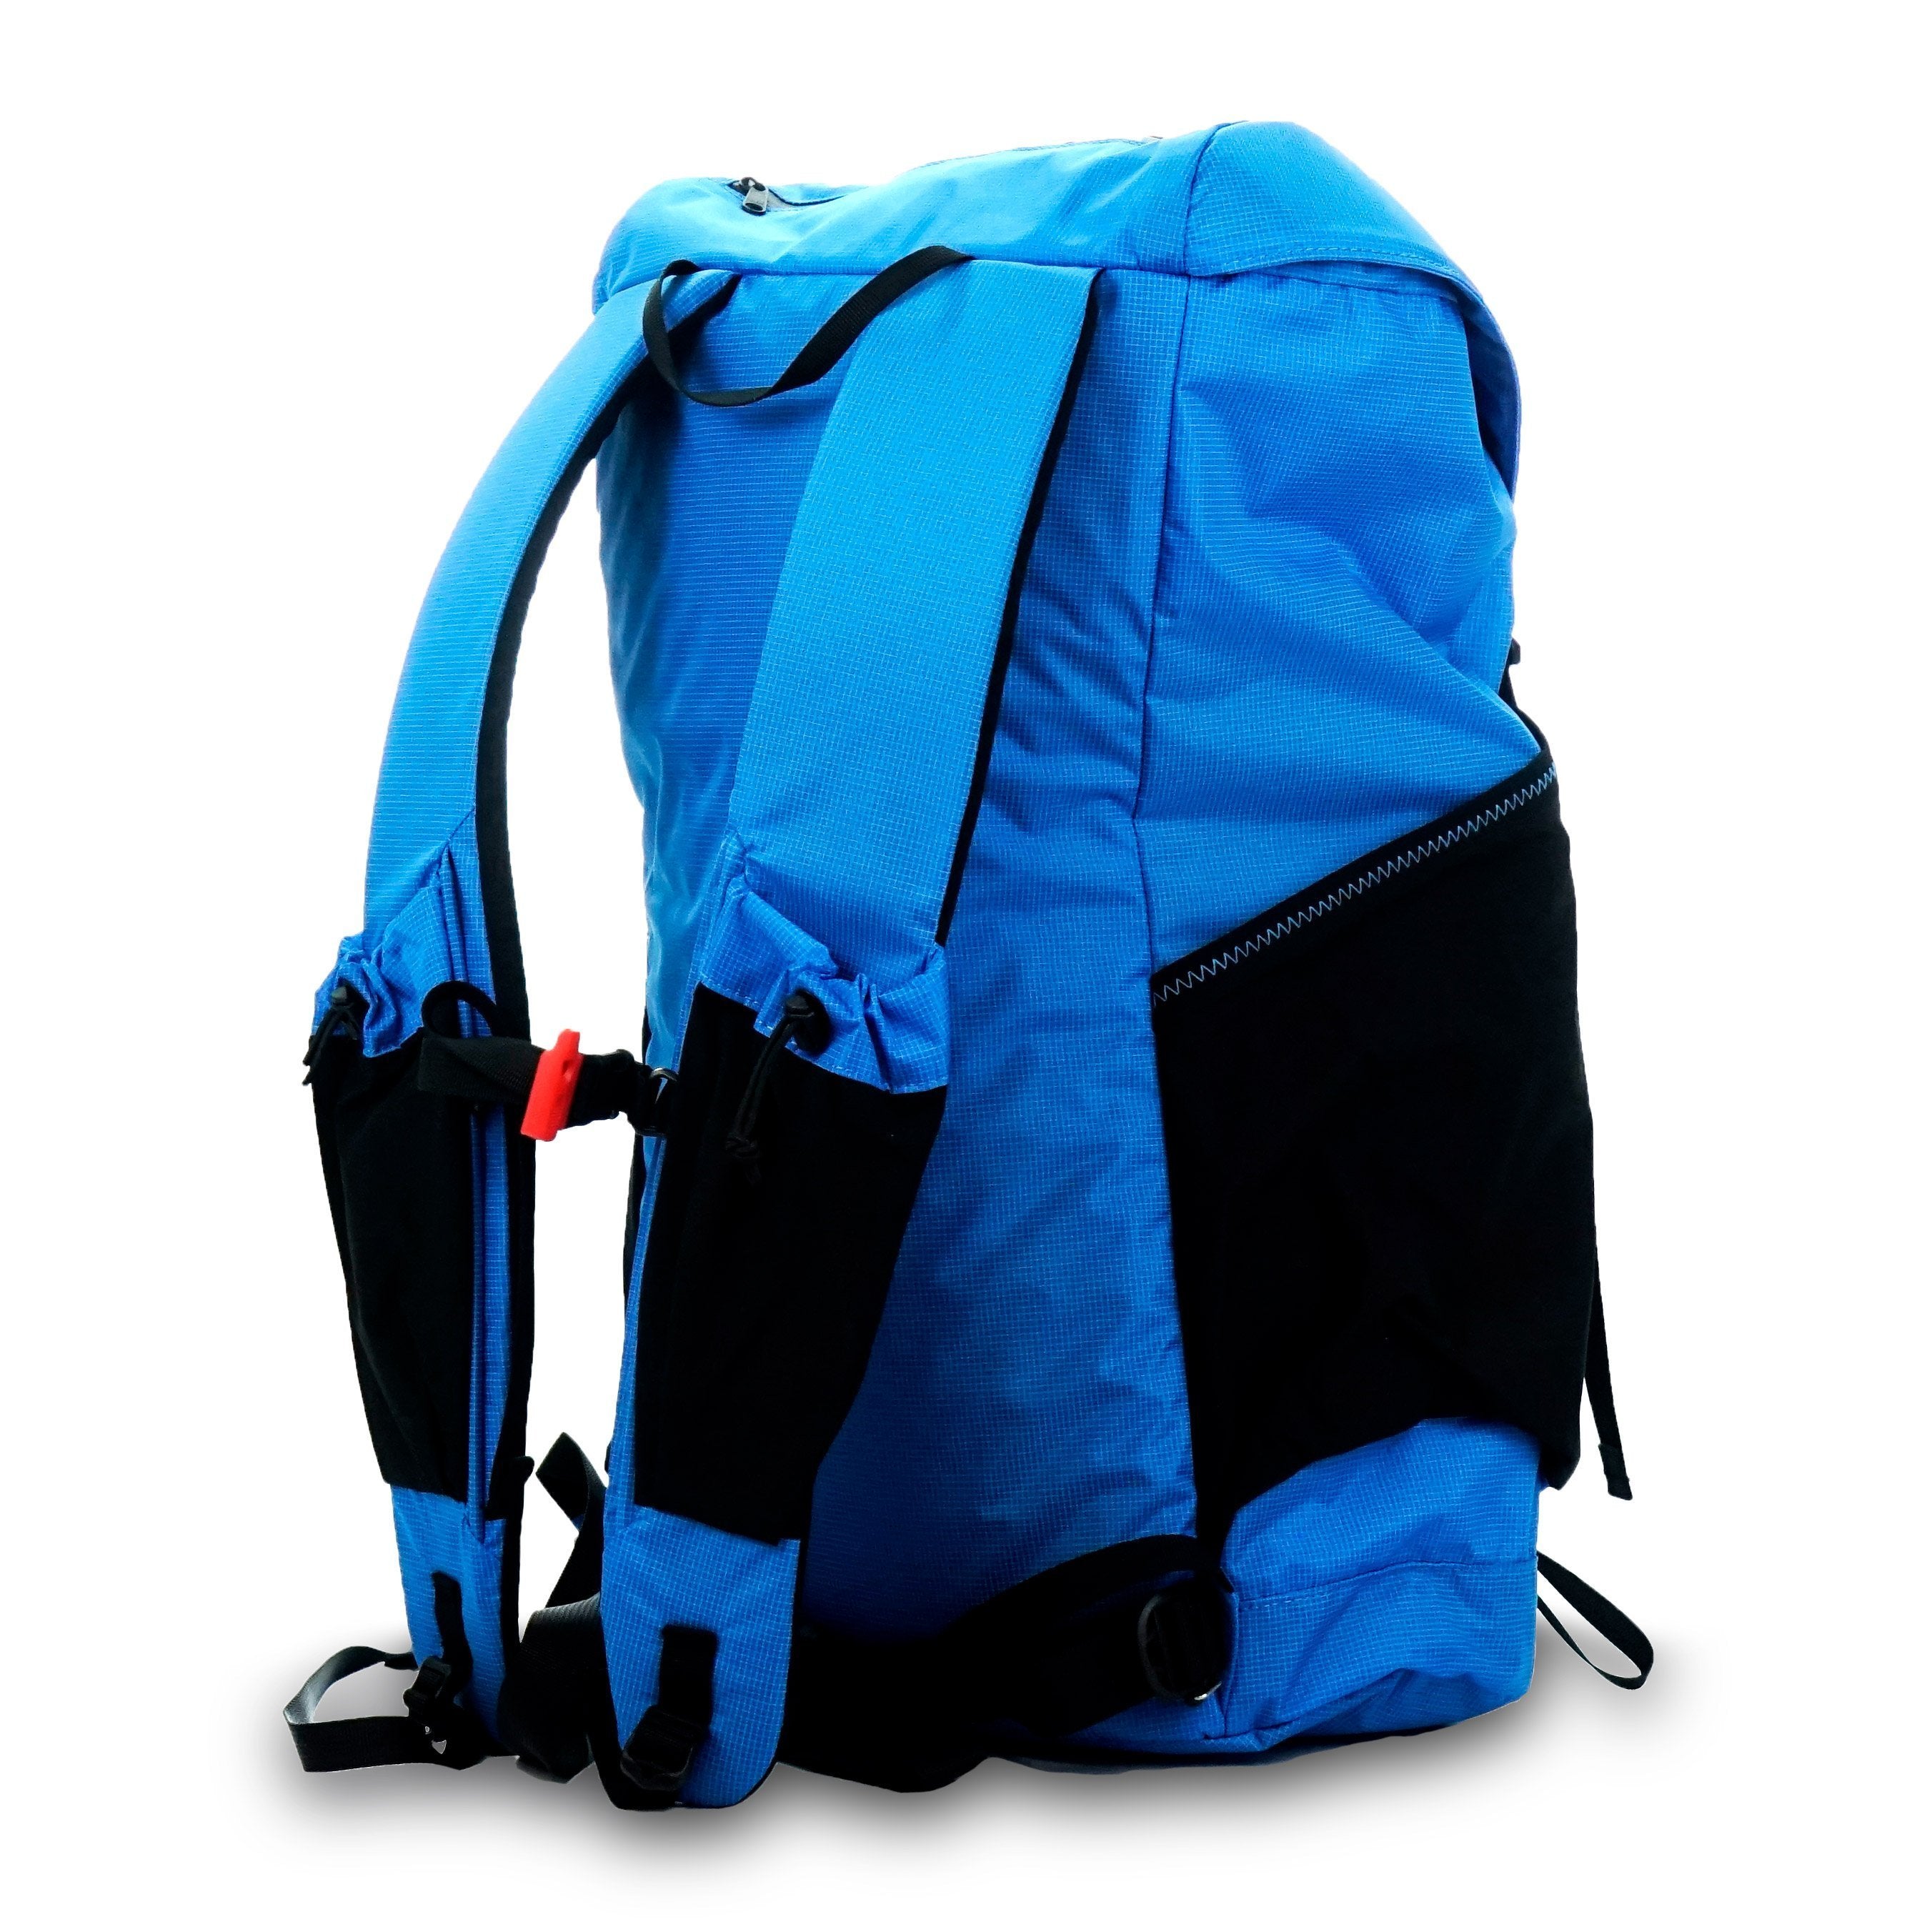 wy'east daypack with shoulder straps